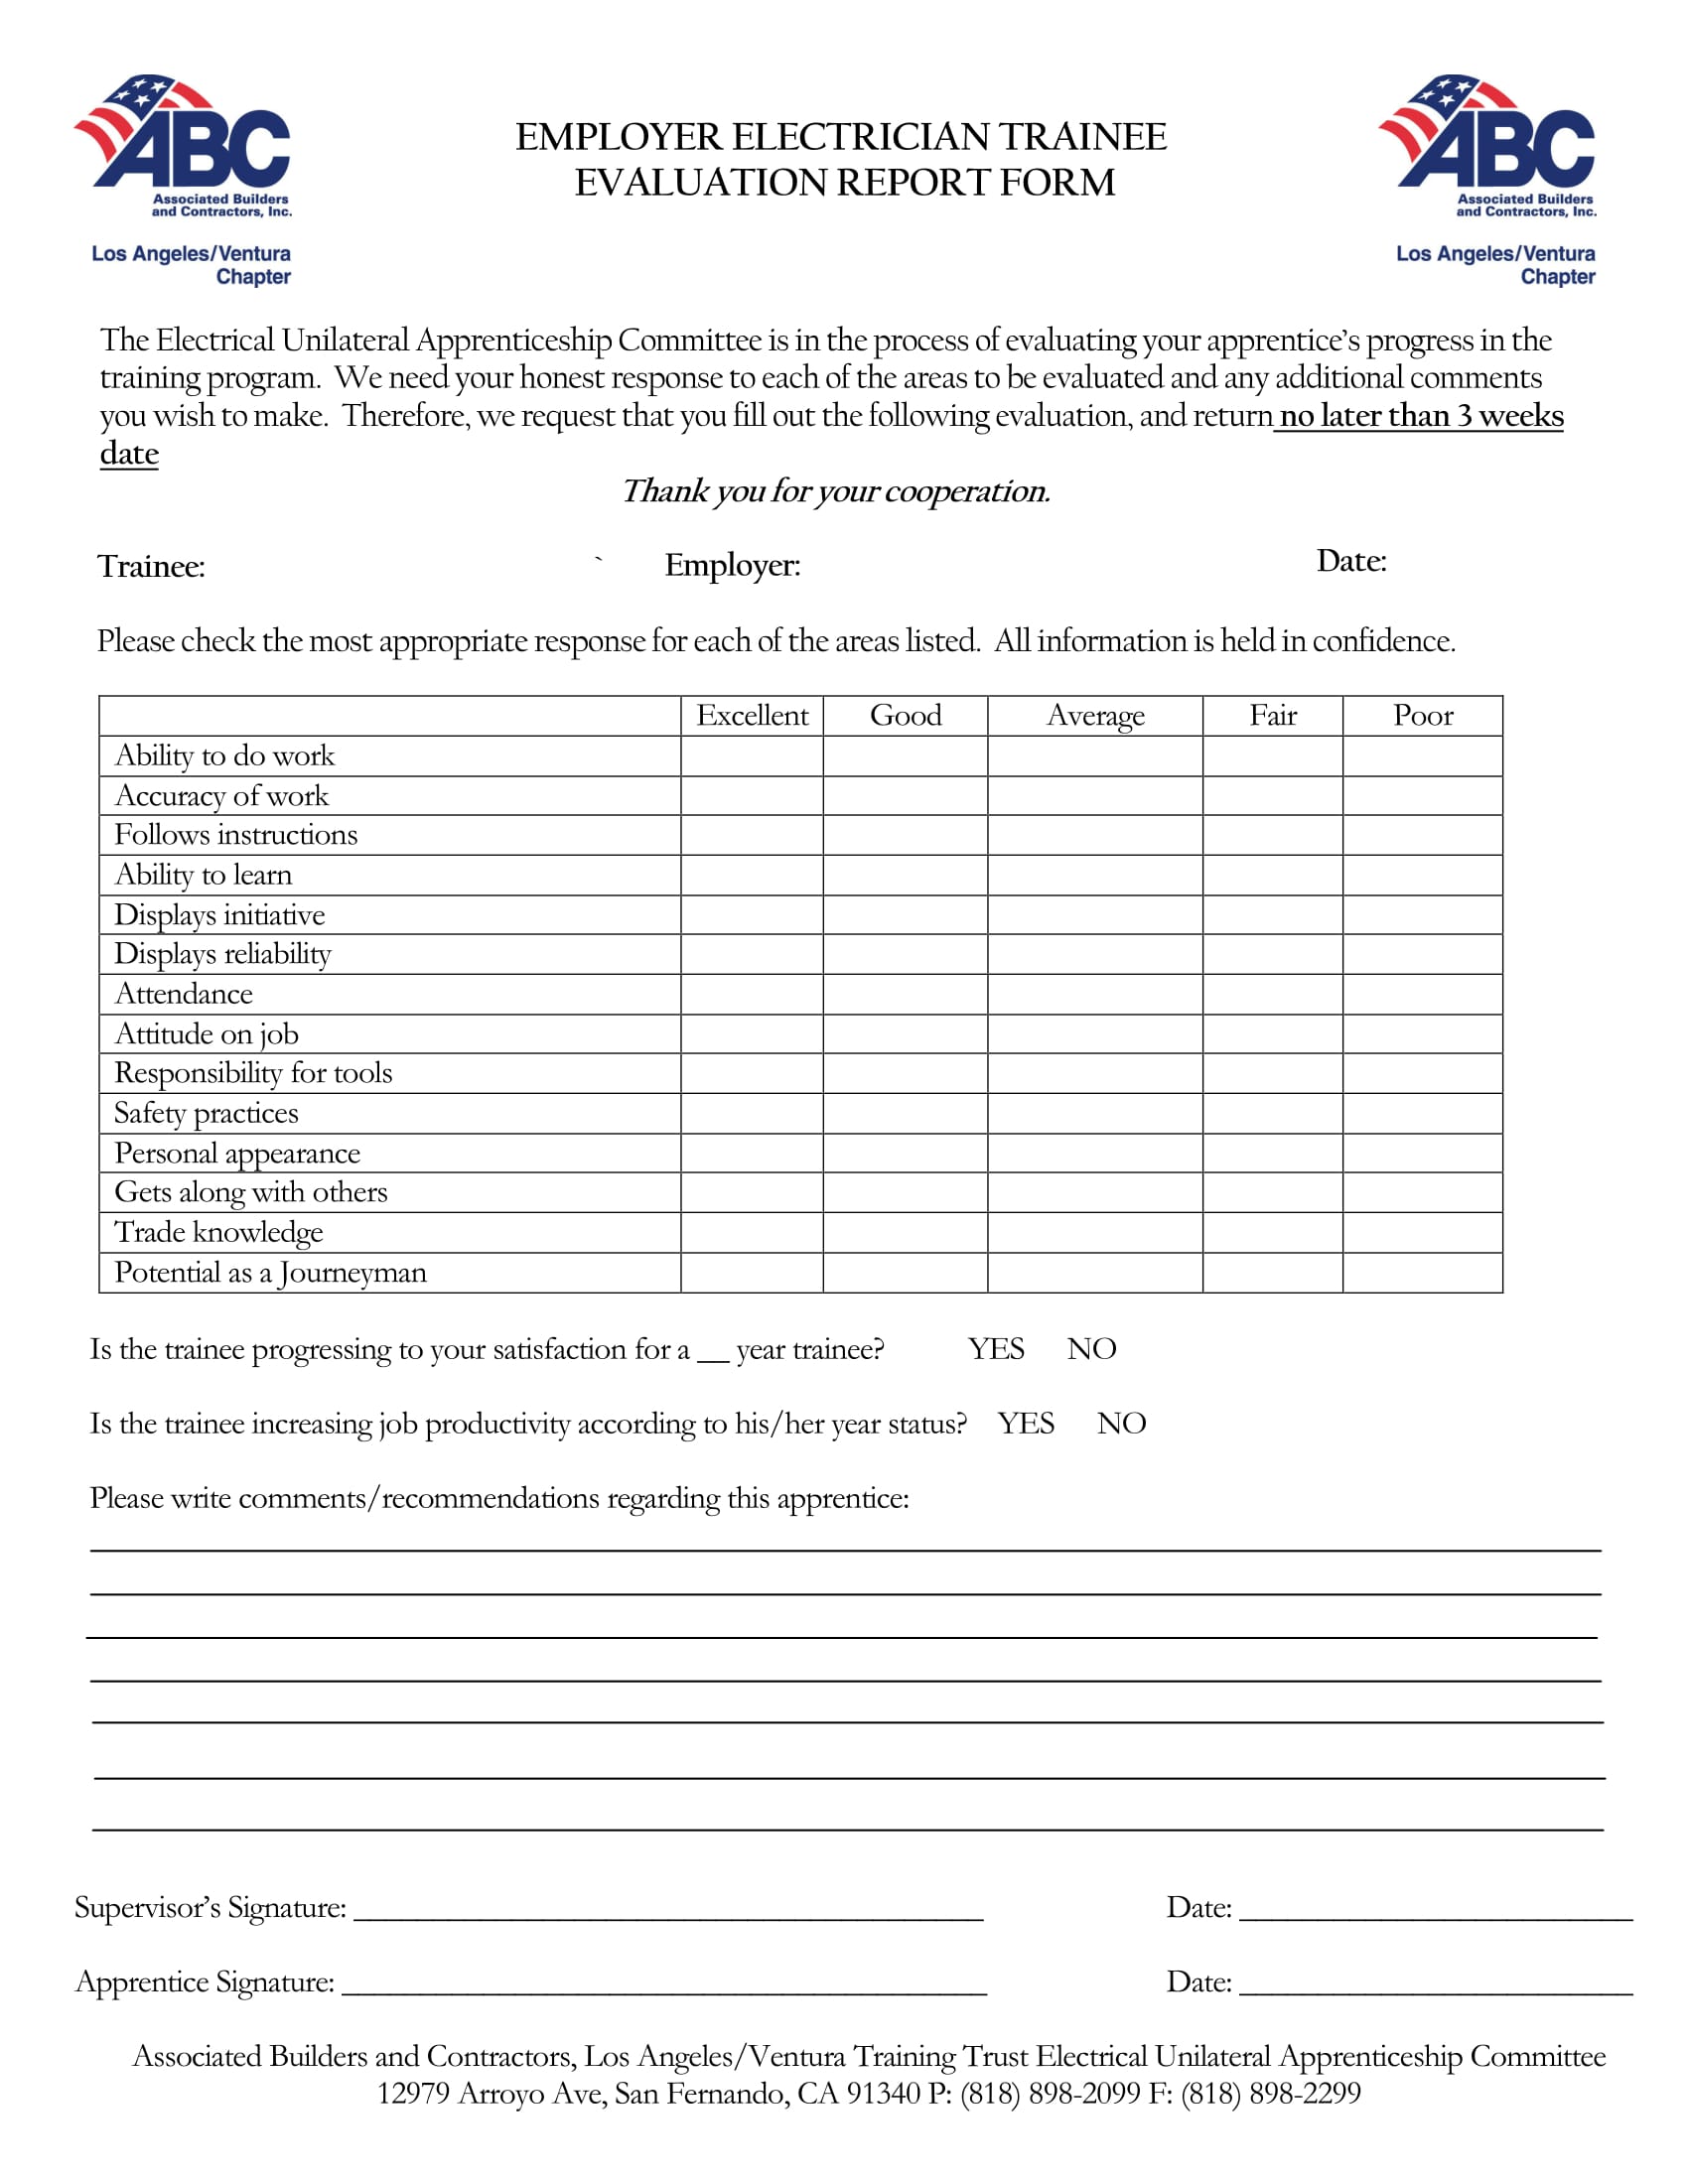 employer electrician trainee evaluation form 1